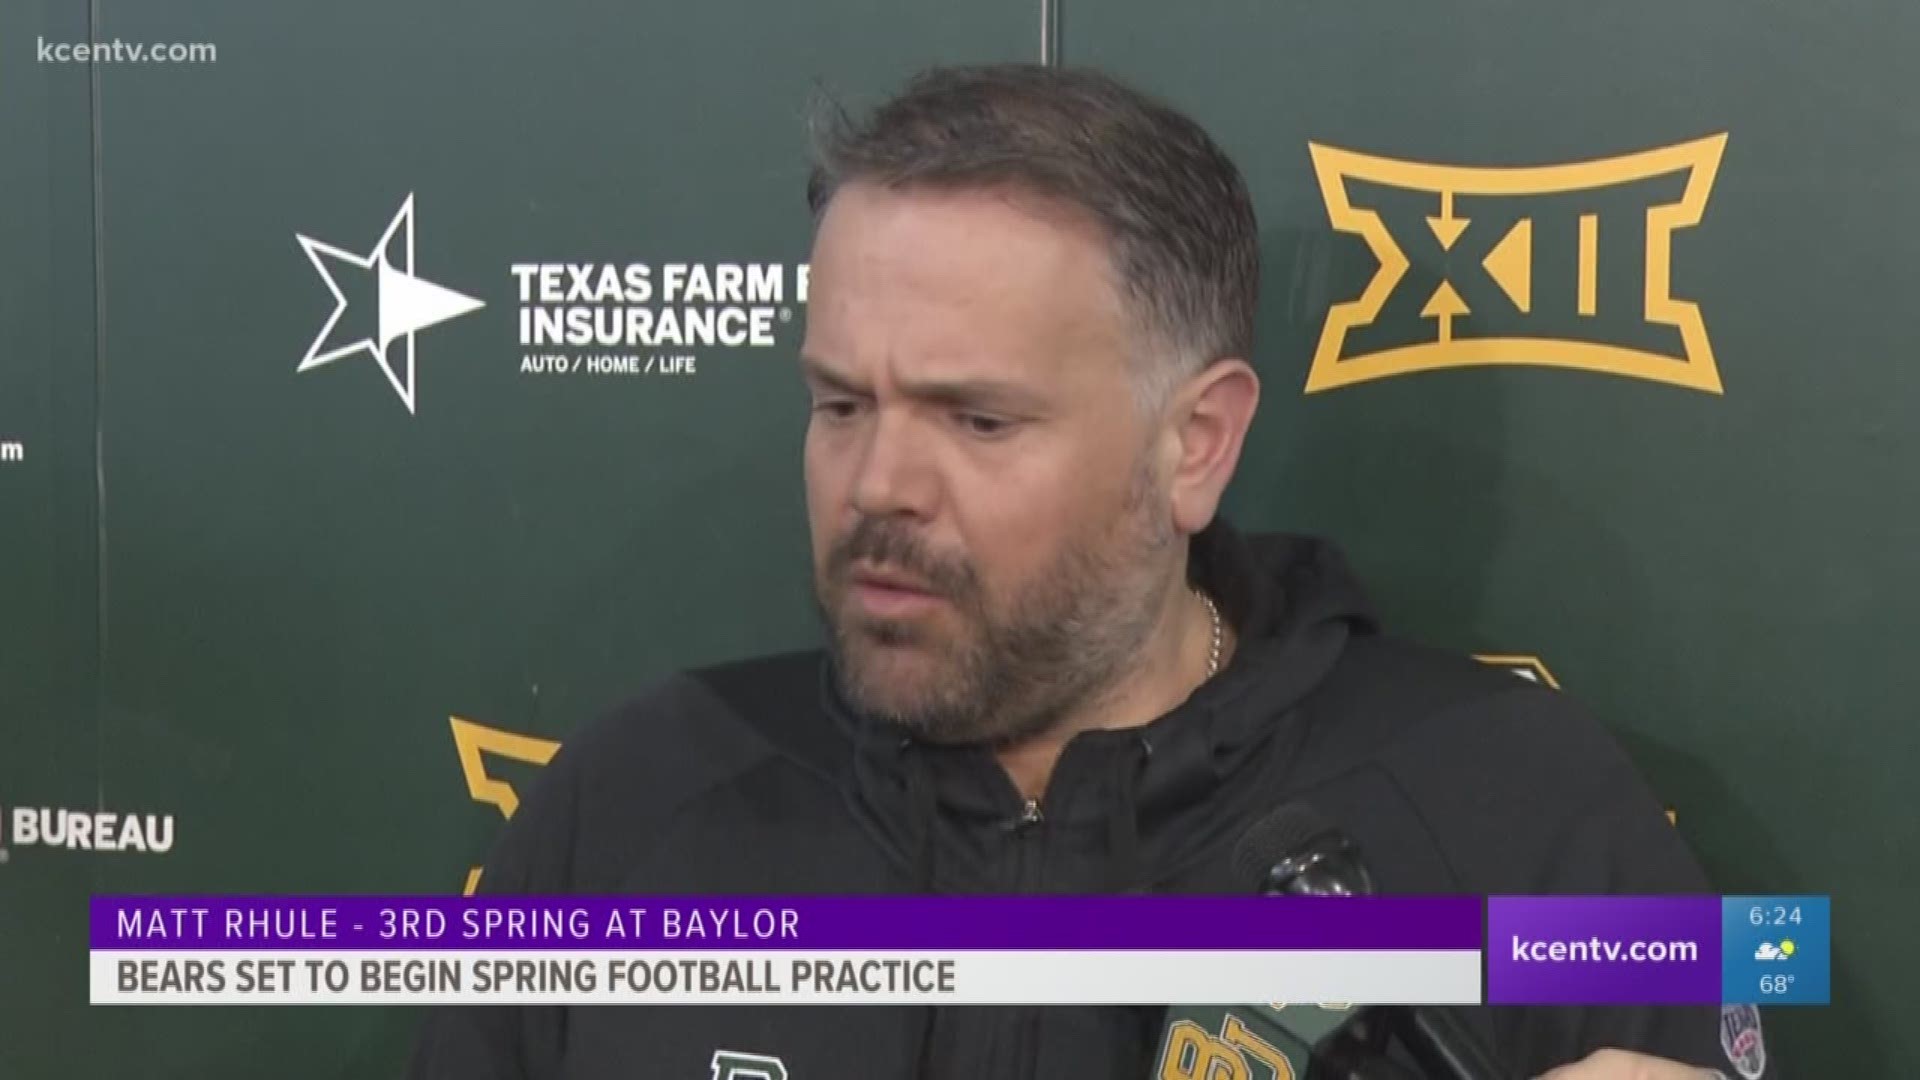 Head coach Matt Rhule said now that it's his third spring in Waco, the focus is on player development rather than installing his system.